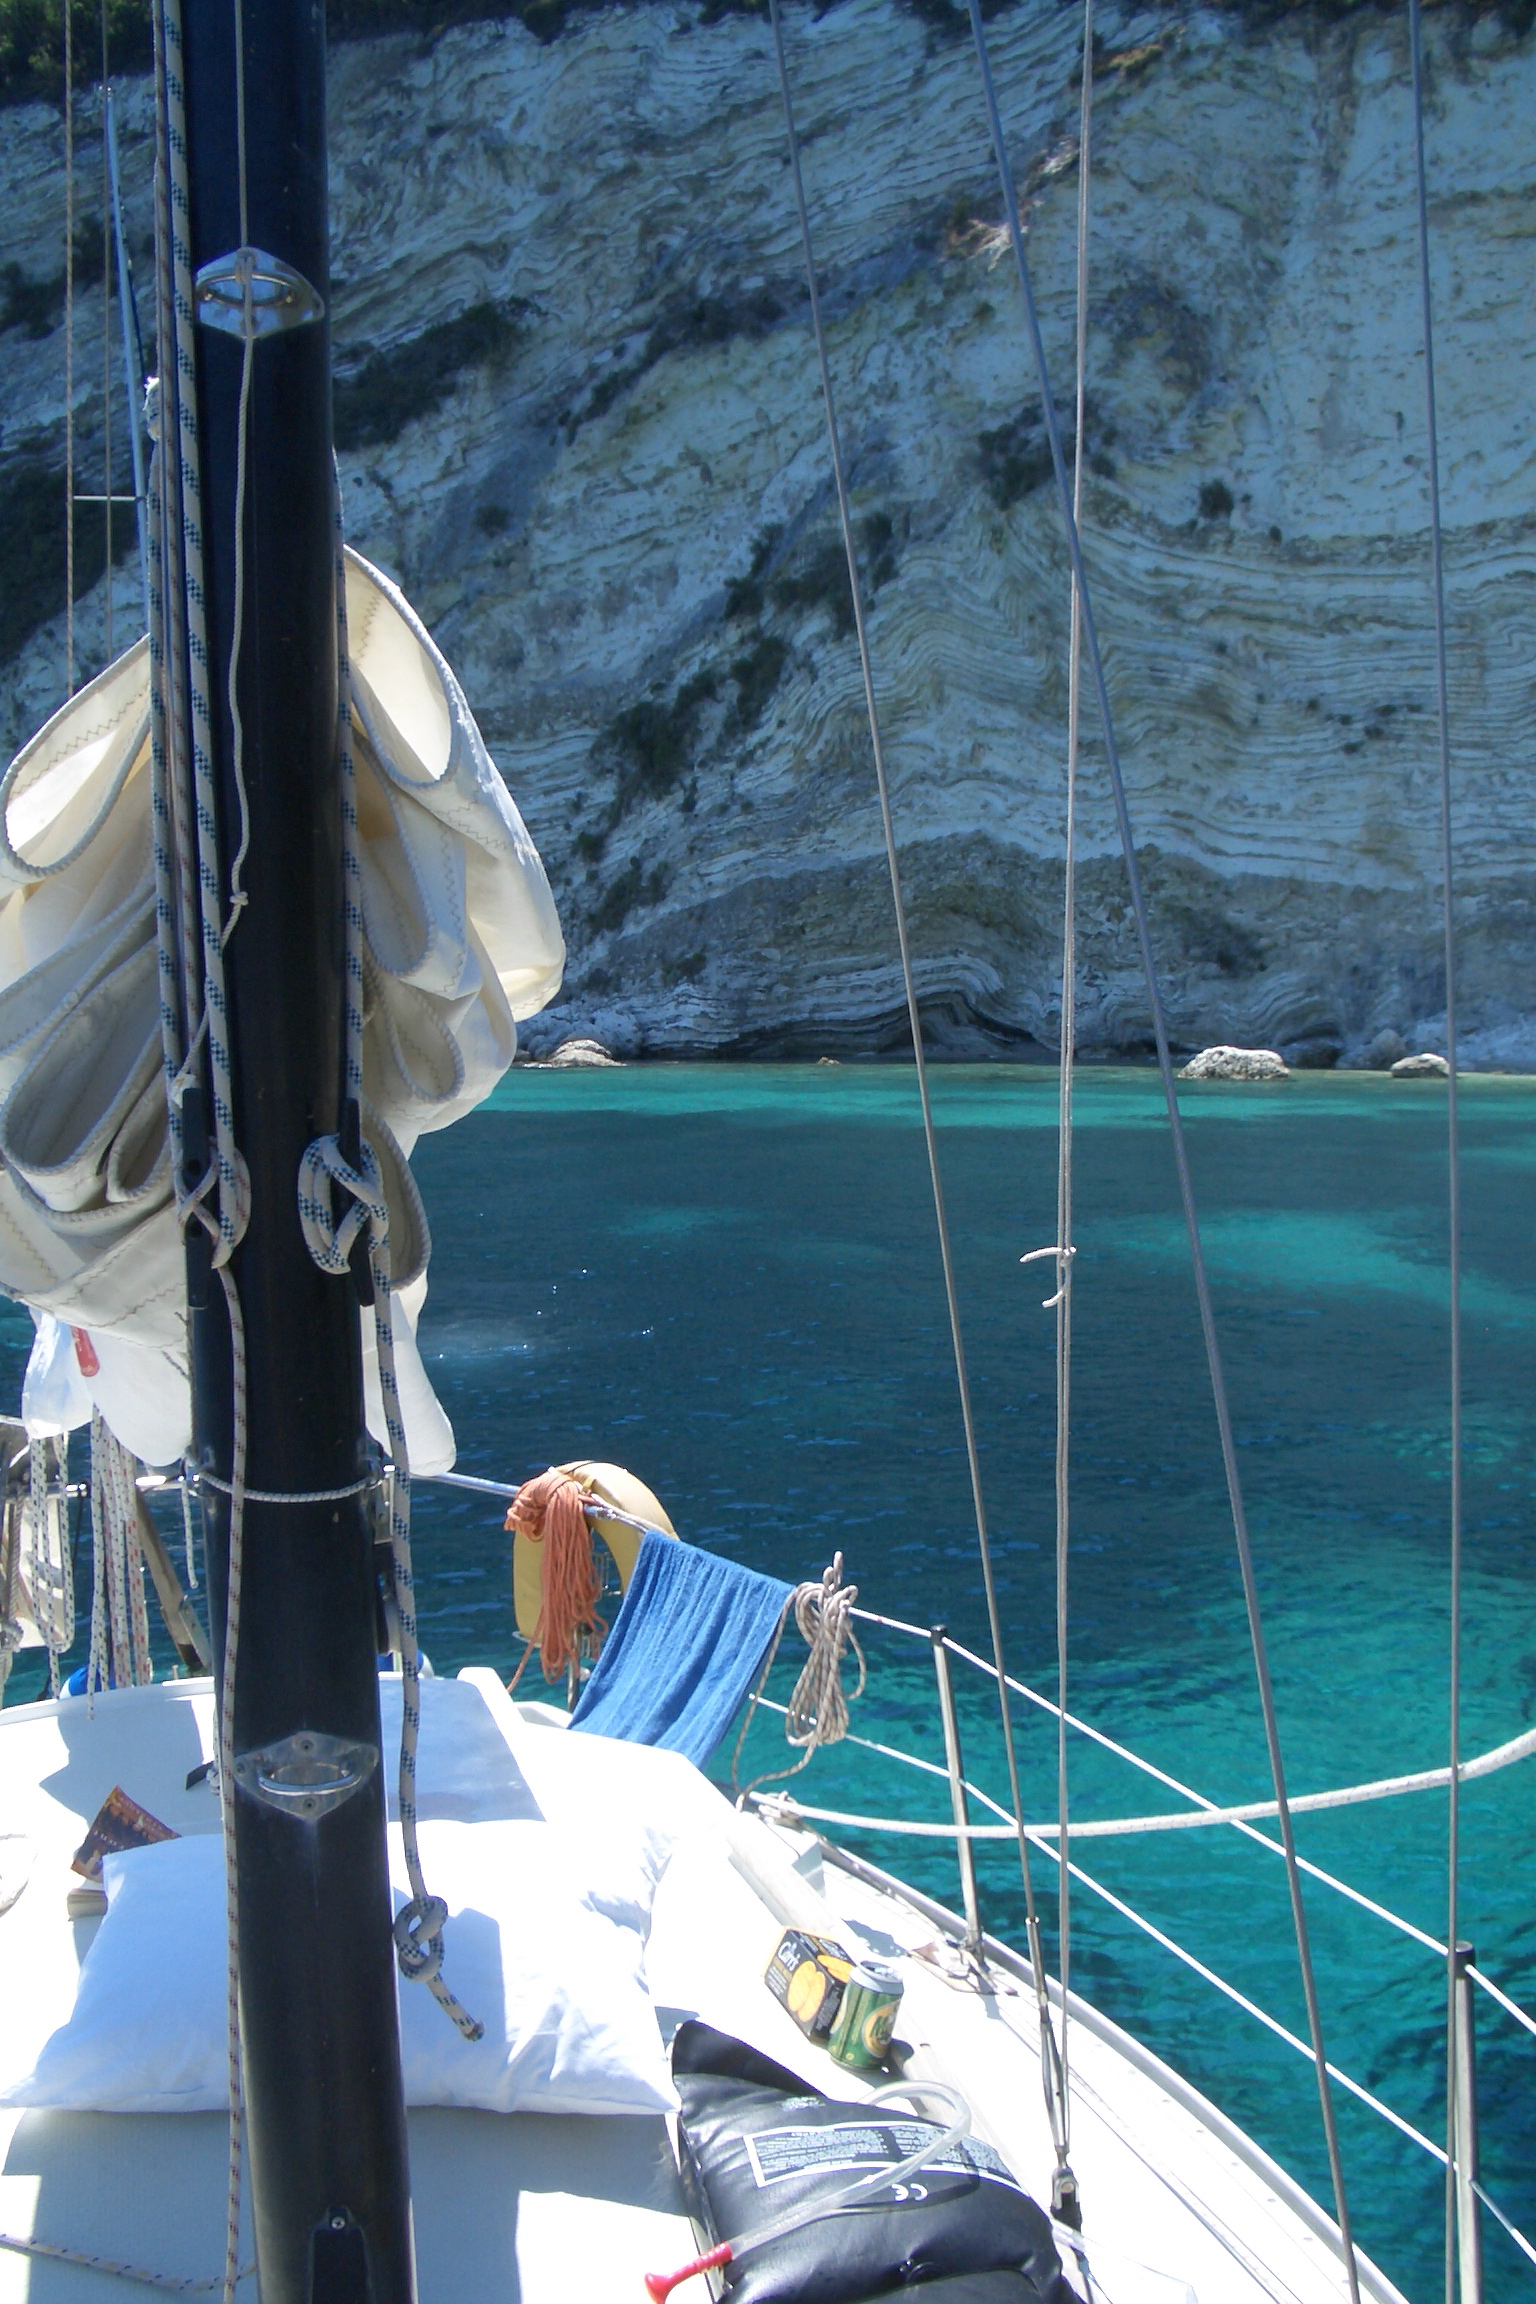 2006: Living the dream. Sailing in the Greek islands.